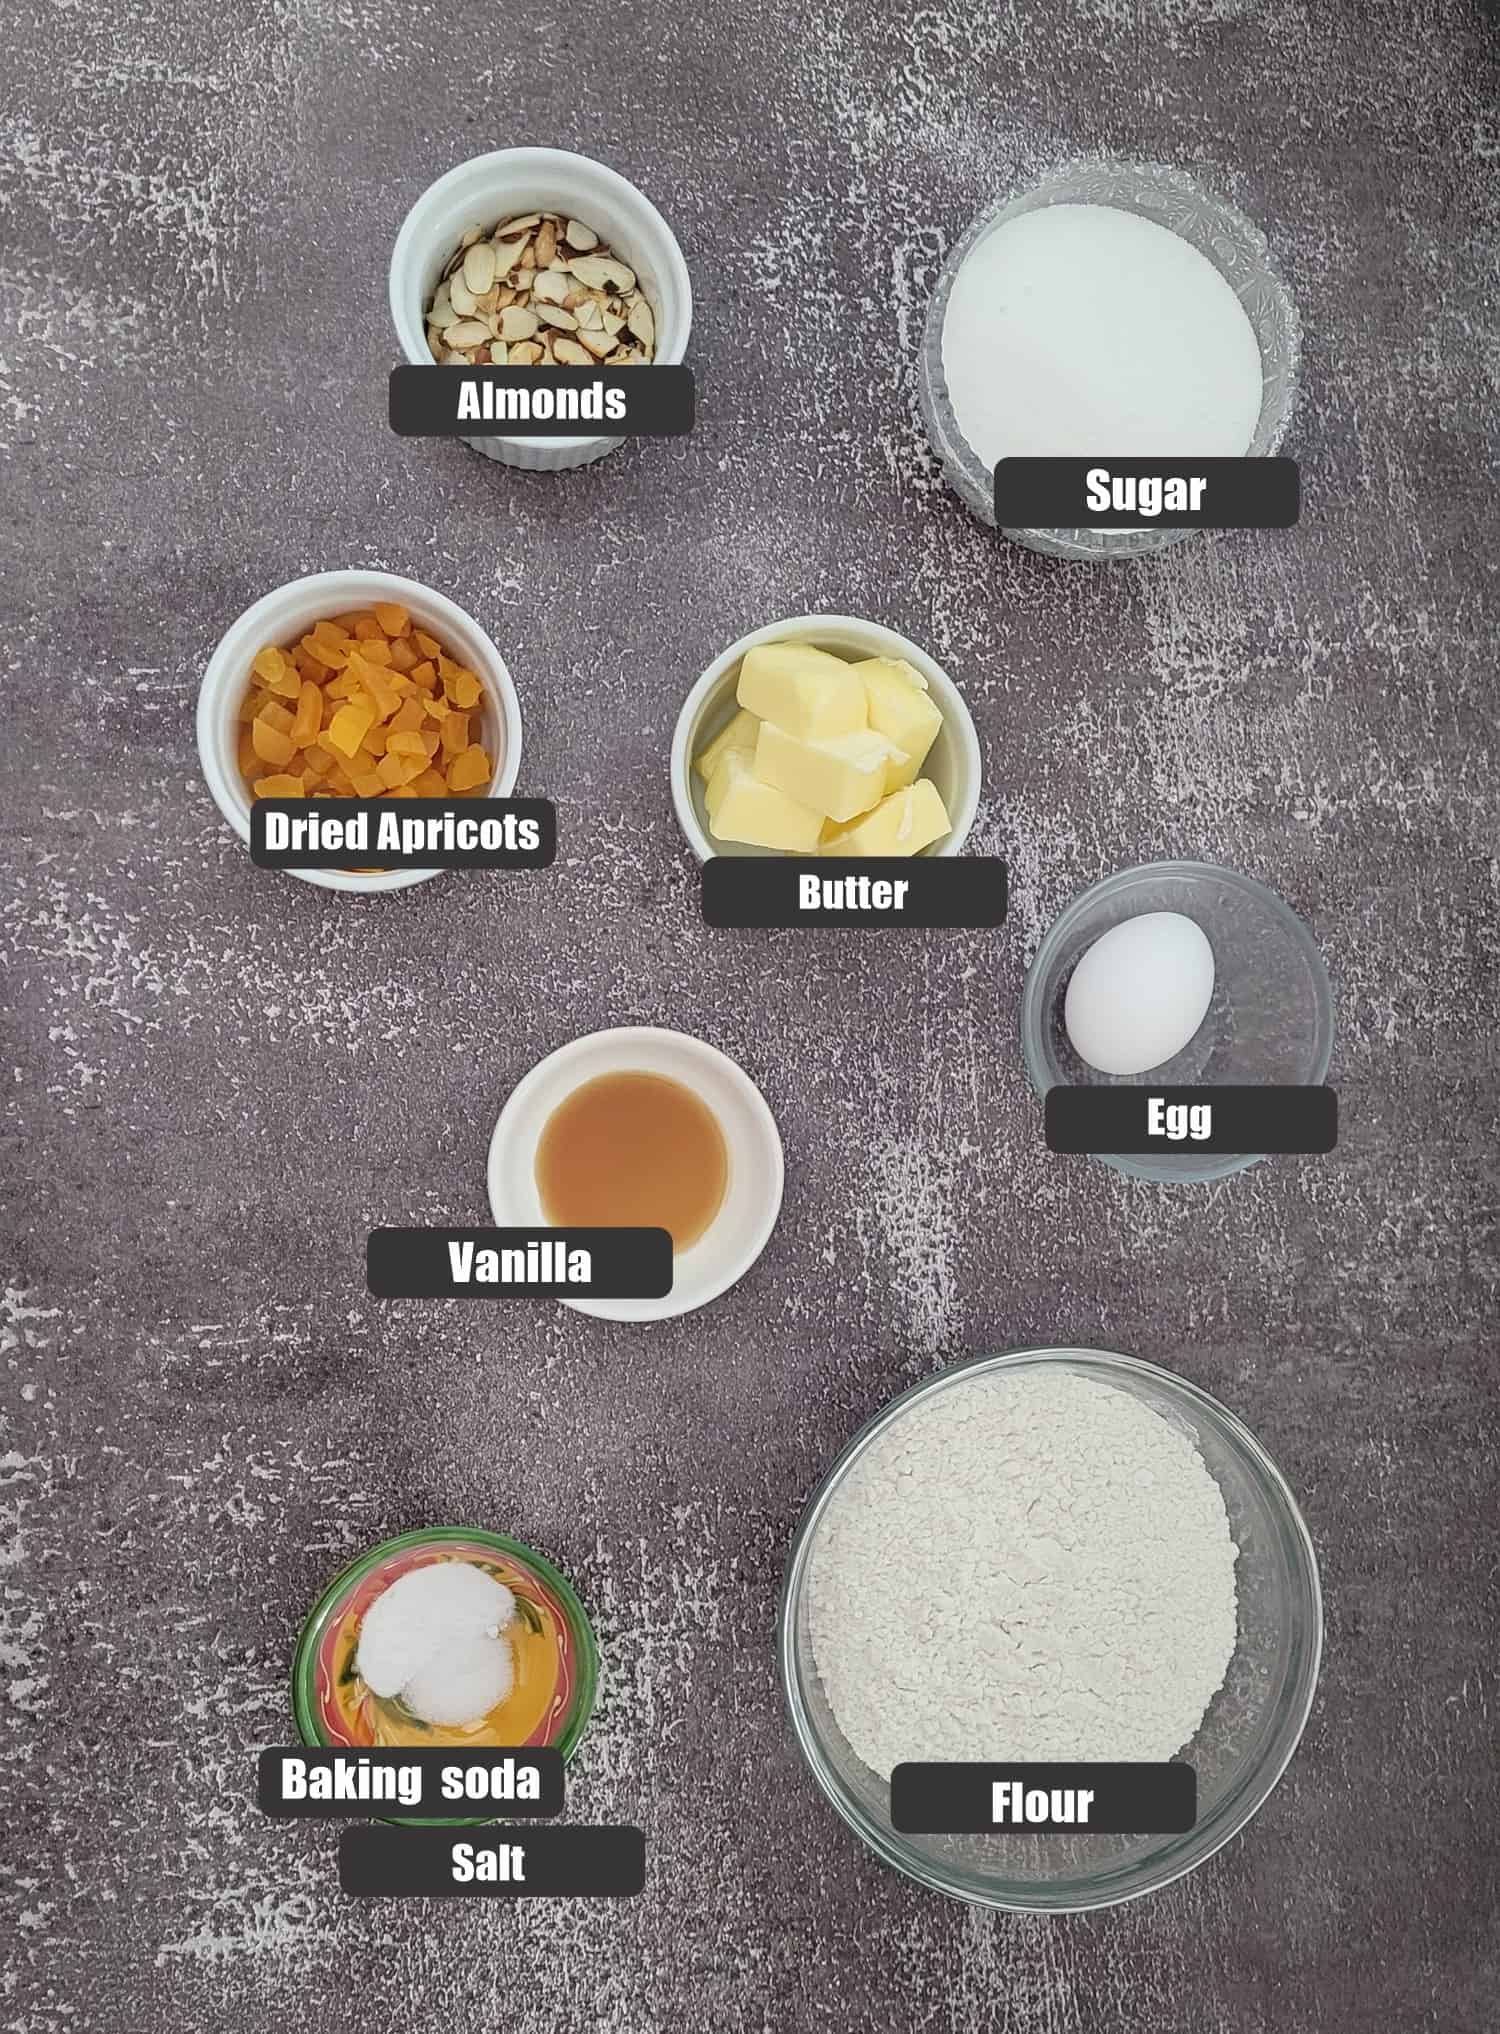 ingredients needed to make apricot almond cookies including apricots, almonds, flour, baking soda, salt, sugar, butter, vanilla and an egg